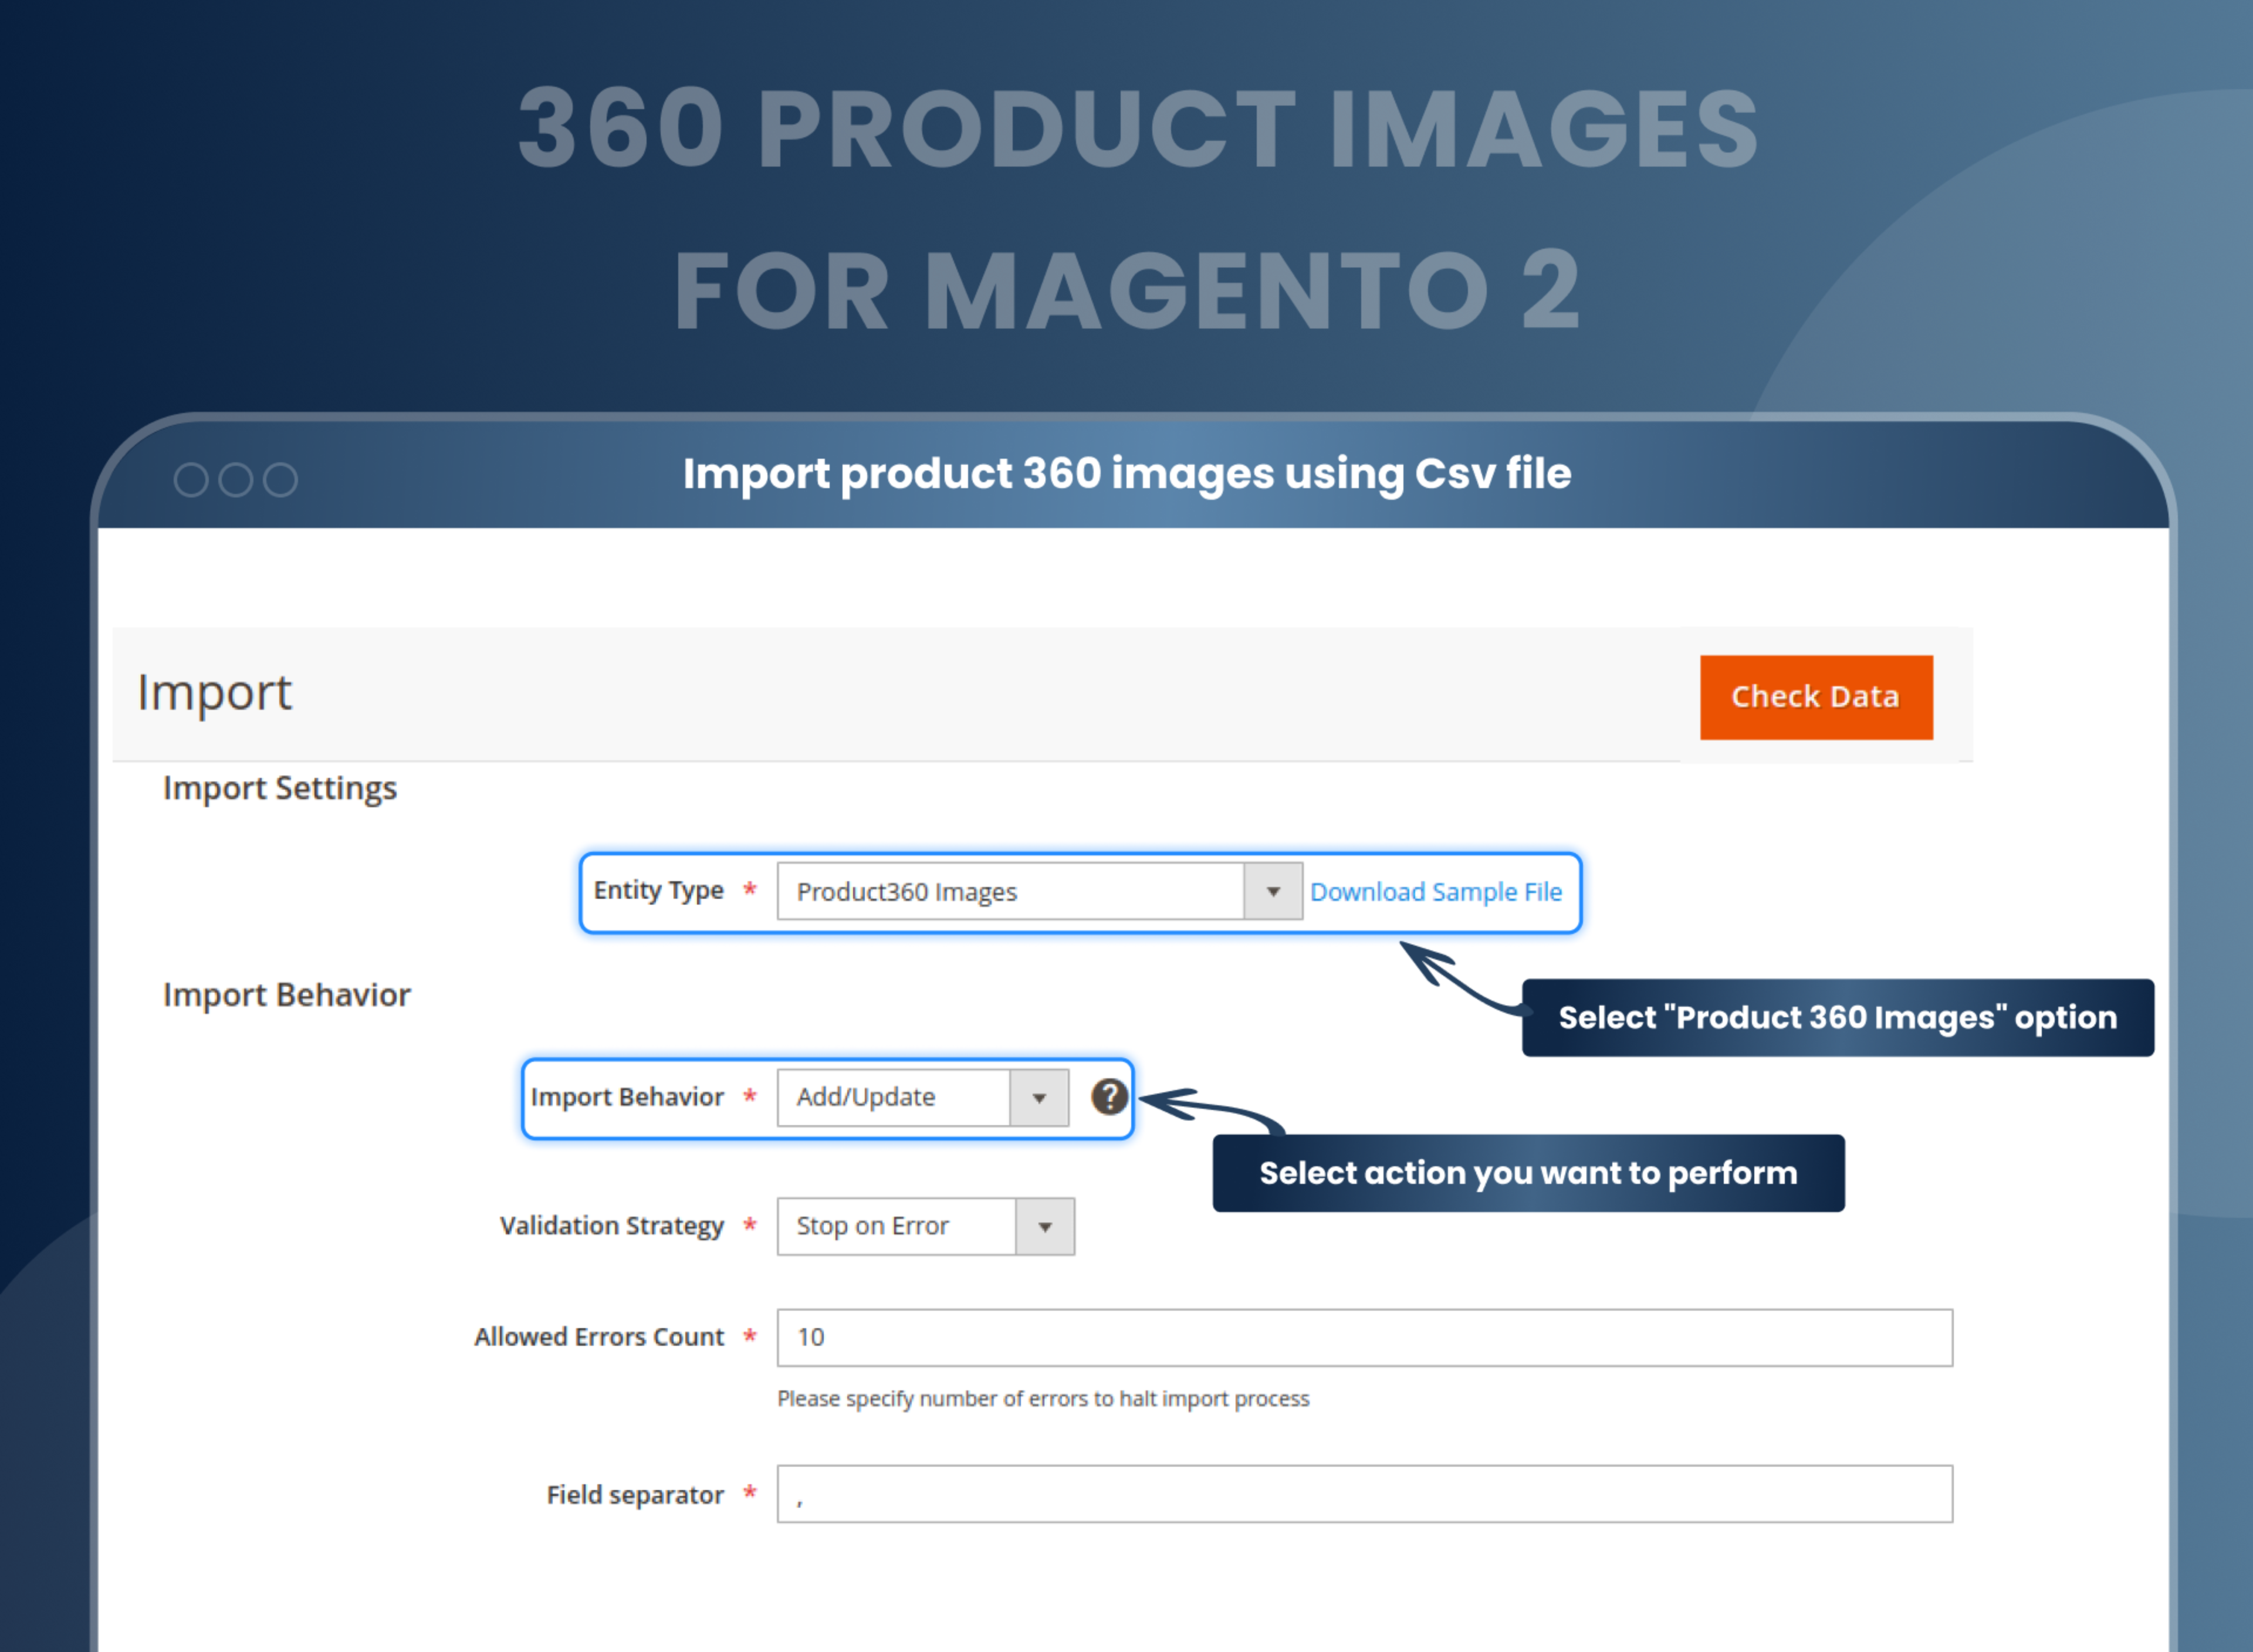 Import product 360 images using Csv file